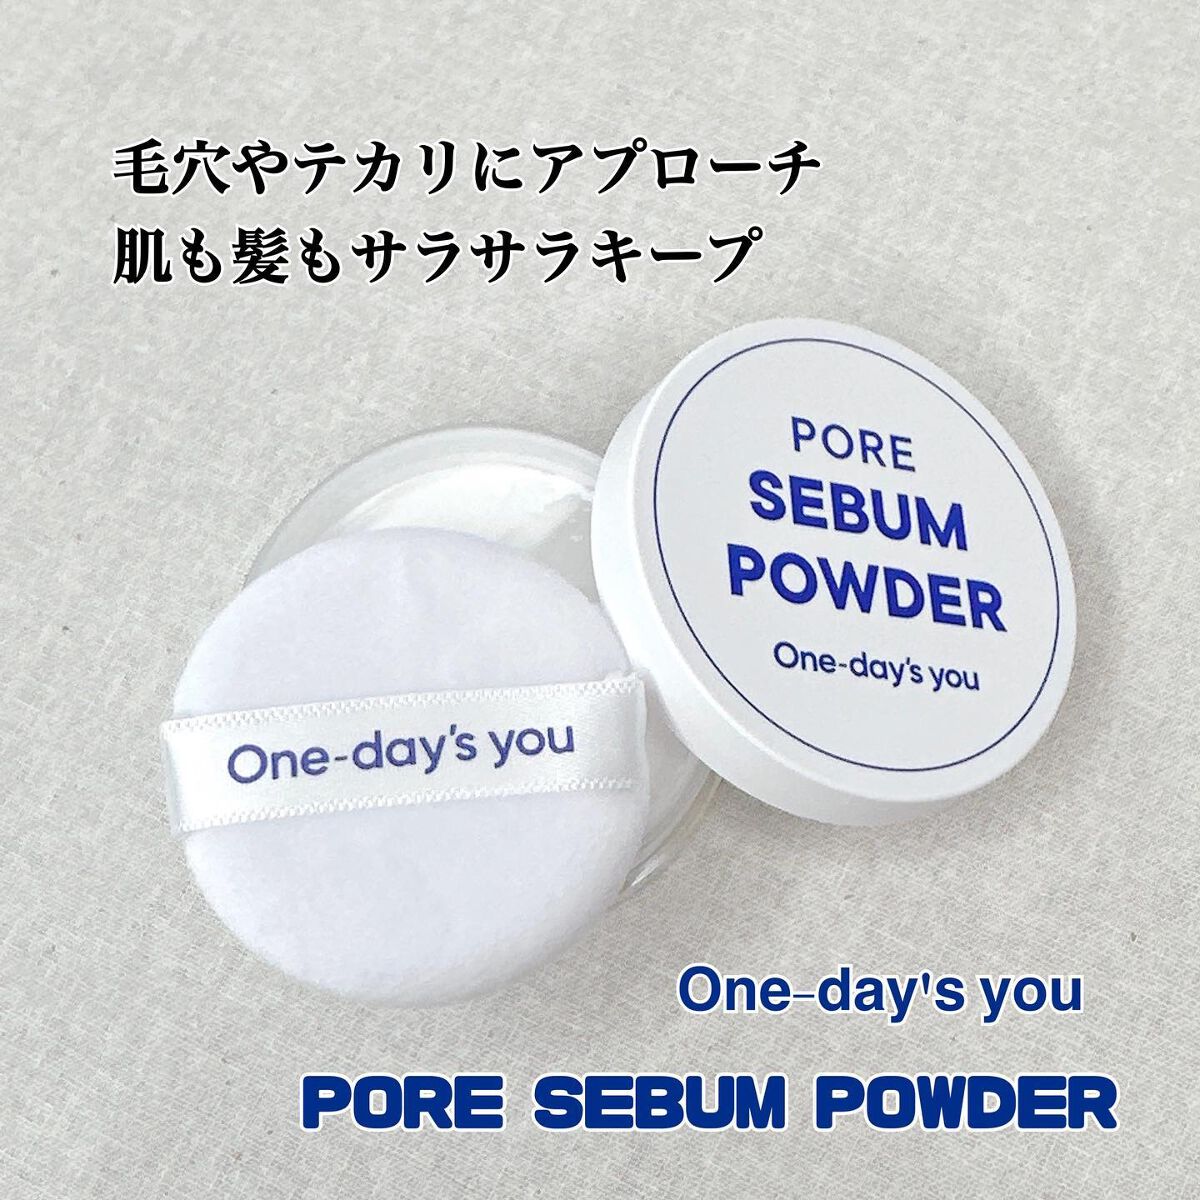 One-day's you ポアセバムパウダー未使用 韓国コスメフェイスパウダー 通販